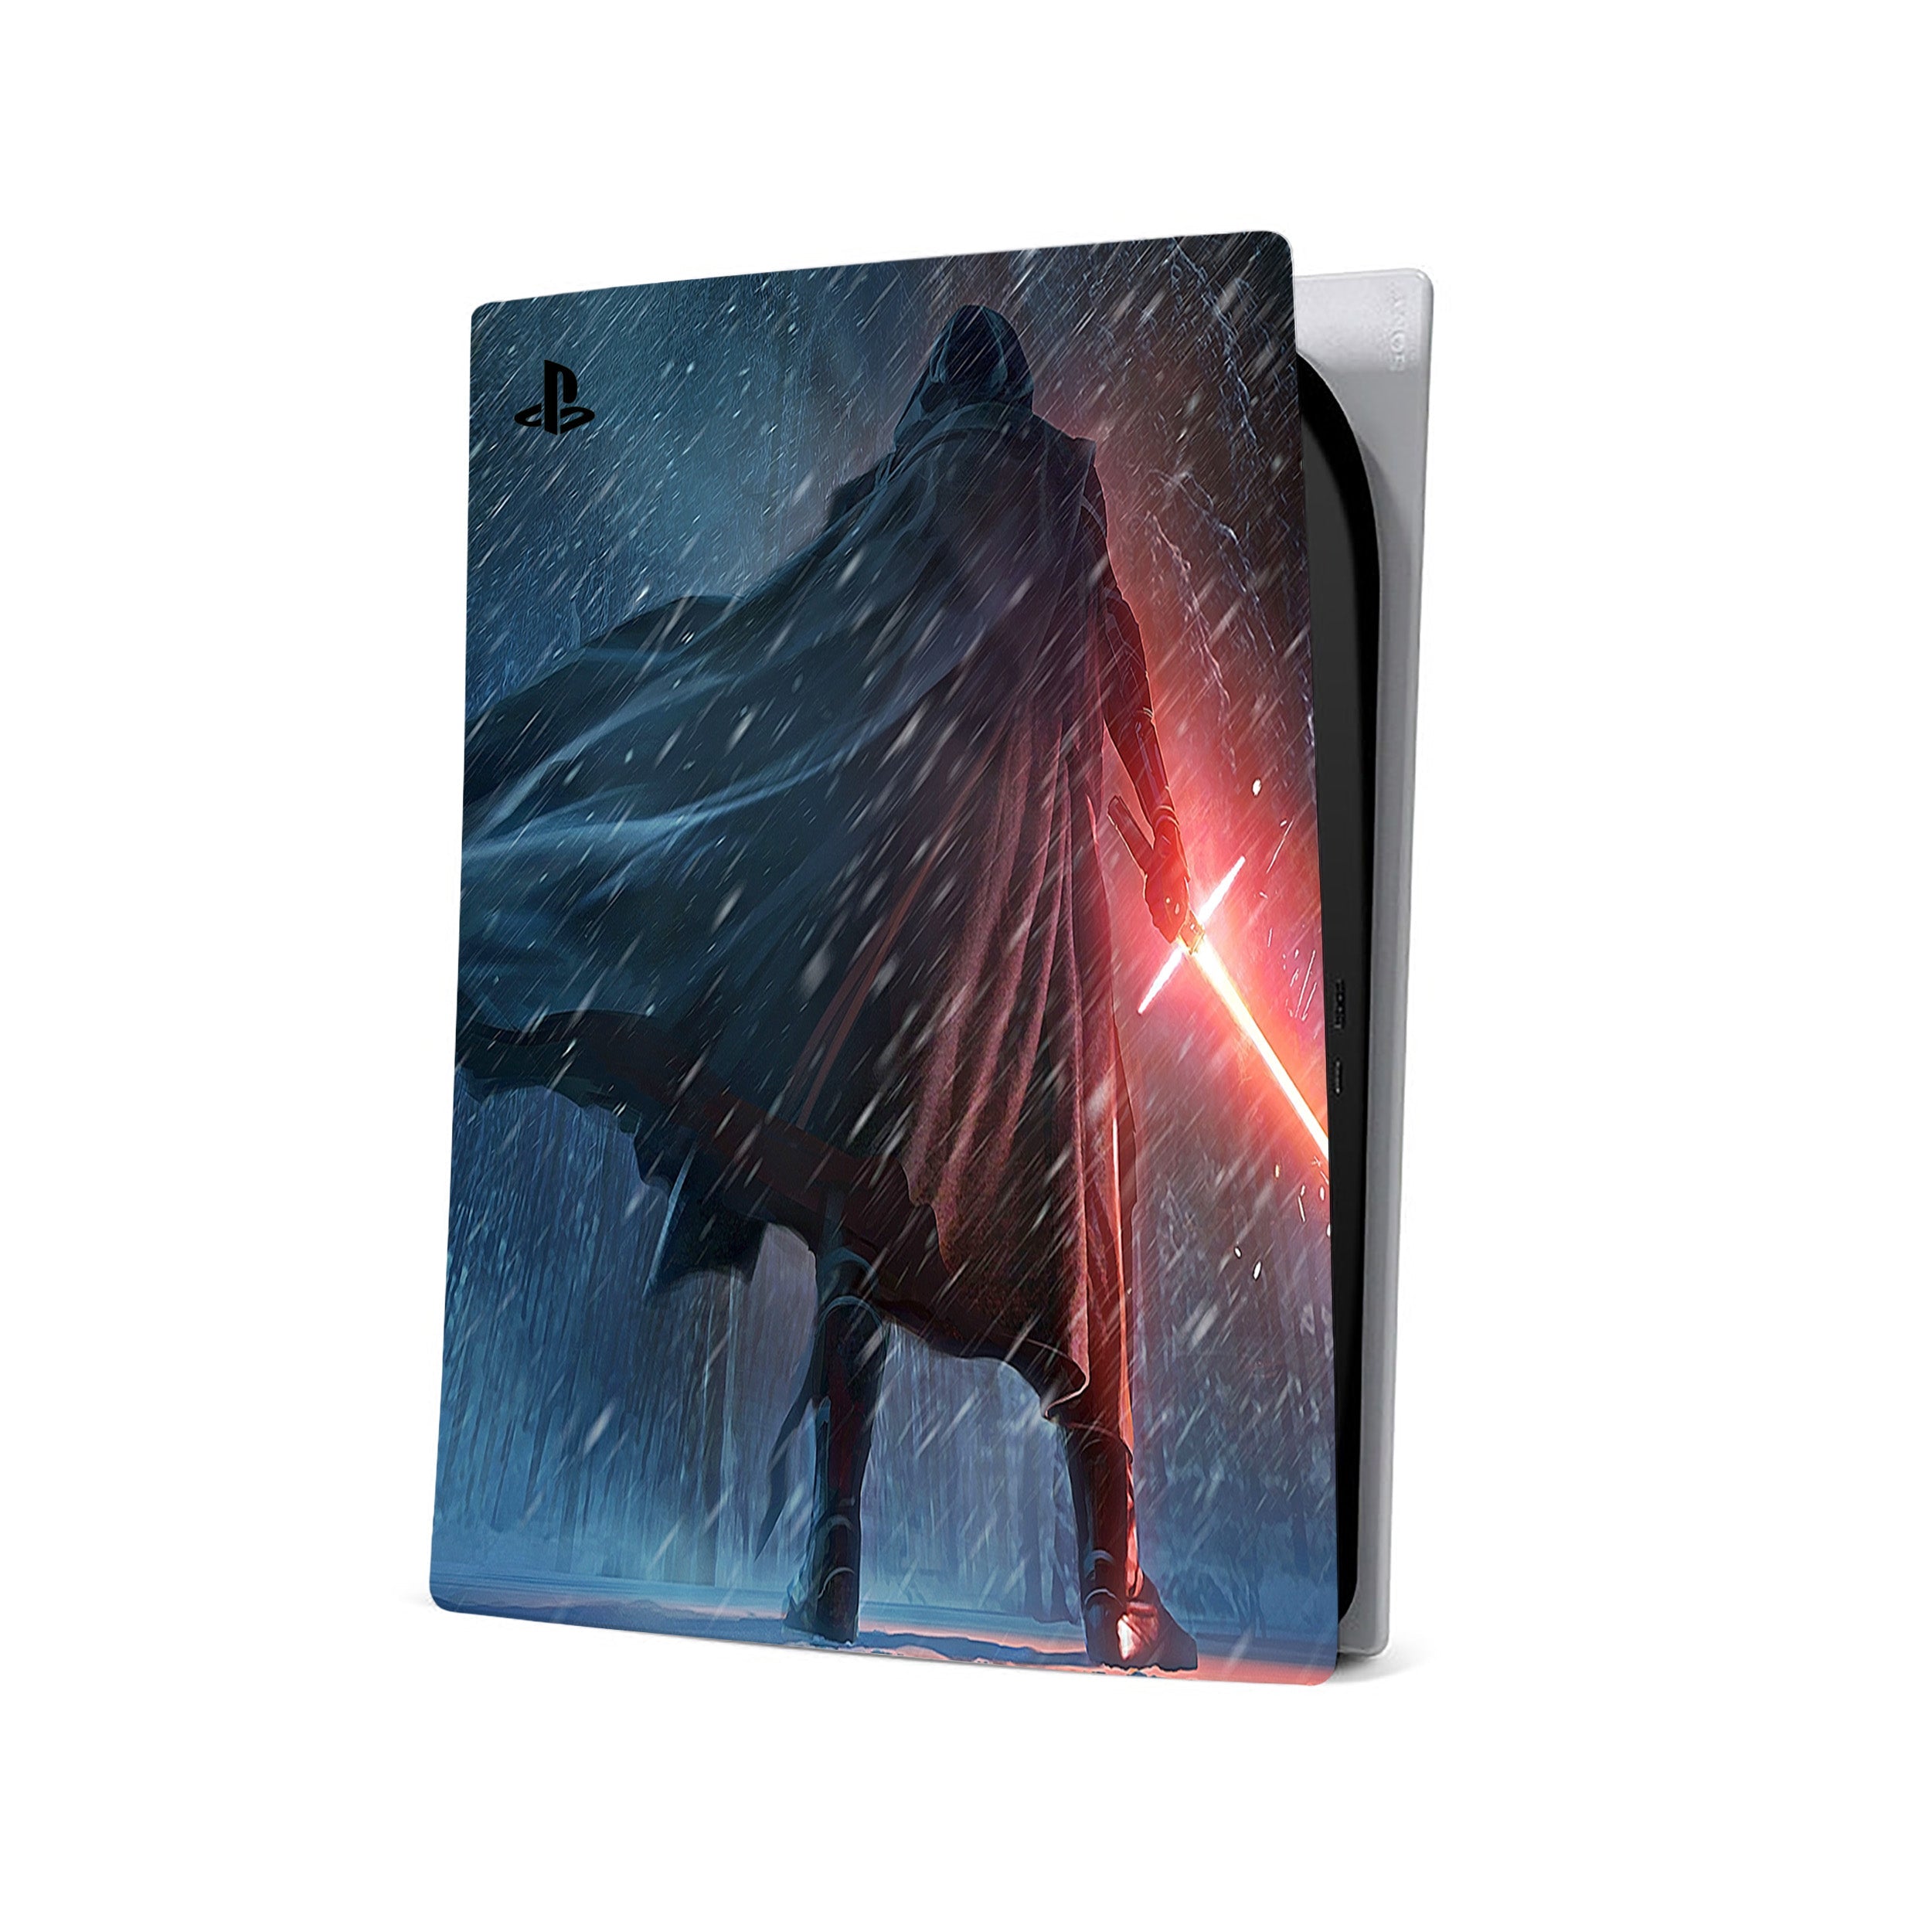 A video game skin featuring a Star Wars Kylo Ren design for the PS5.